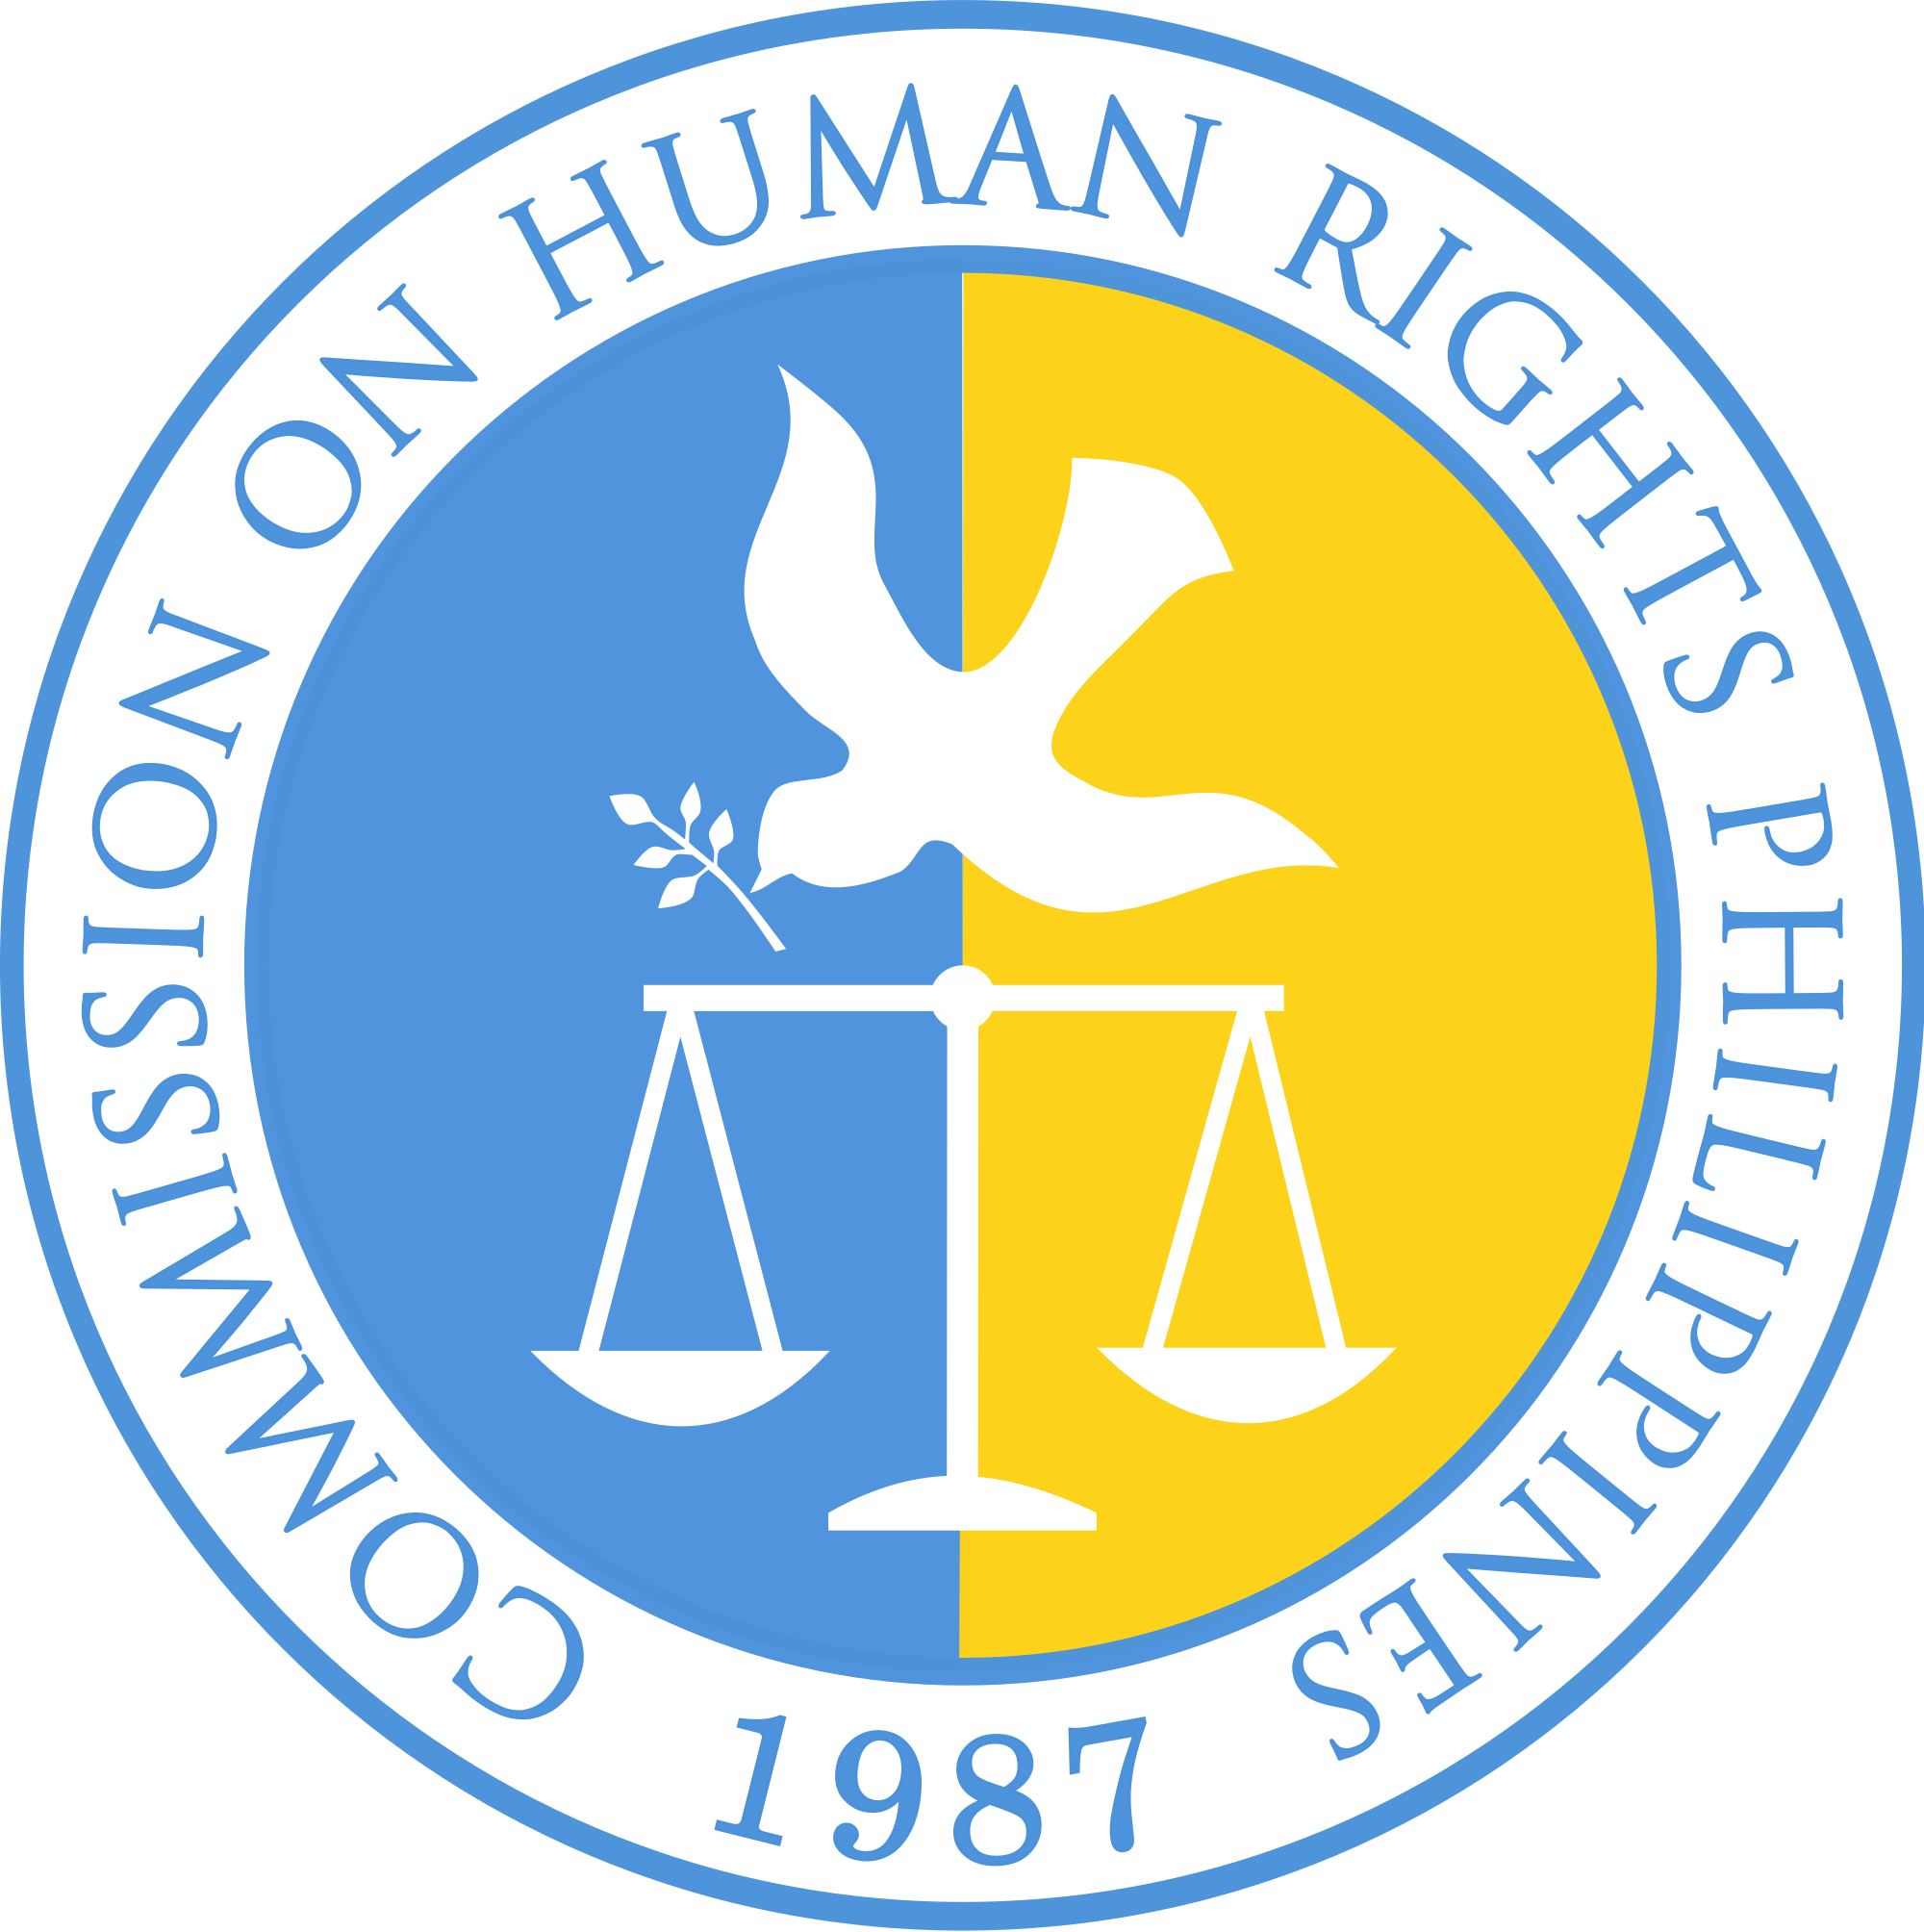 Commission On Human Rights - Commission On Human Rights (2000x2008)